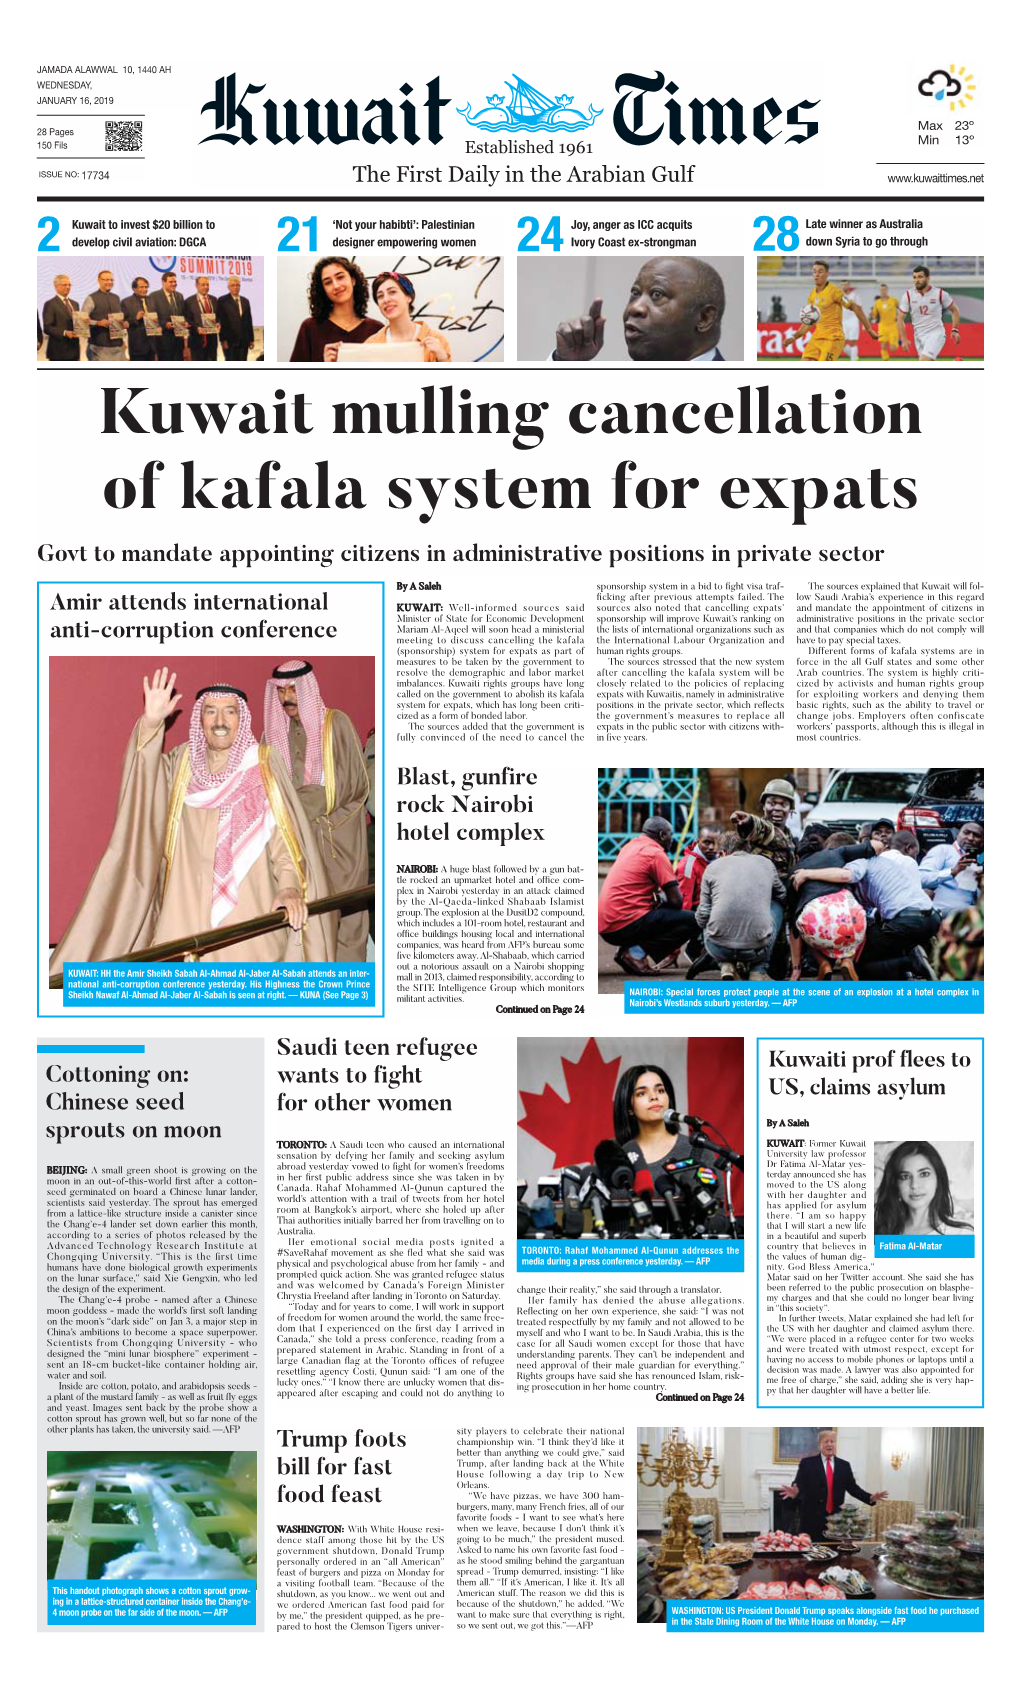 Kuwait Mulling Cancellation of Kafala System for Expats Govt to Mandate Appointing Citizens in Administrative Positions in Private Sector